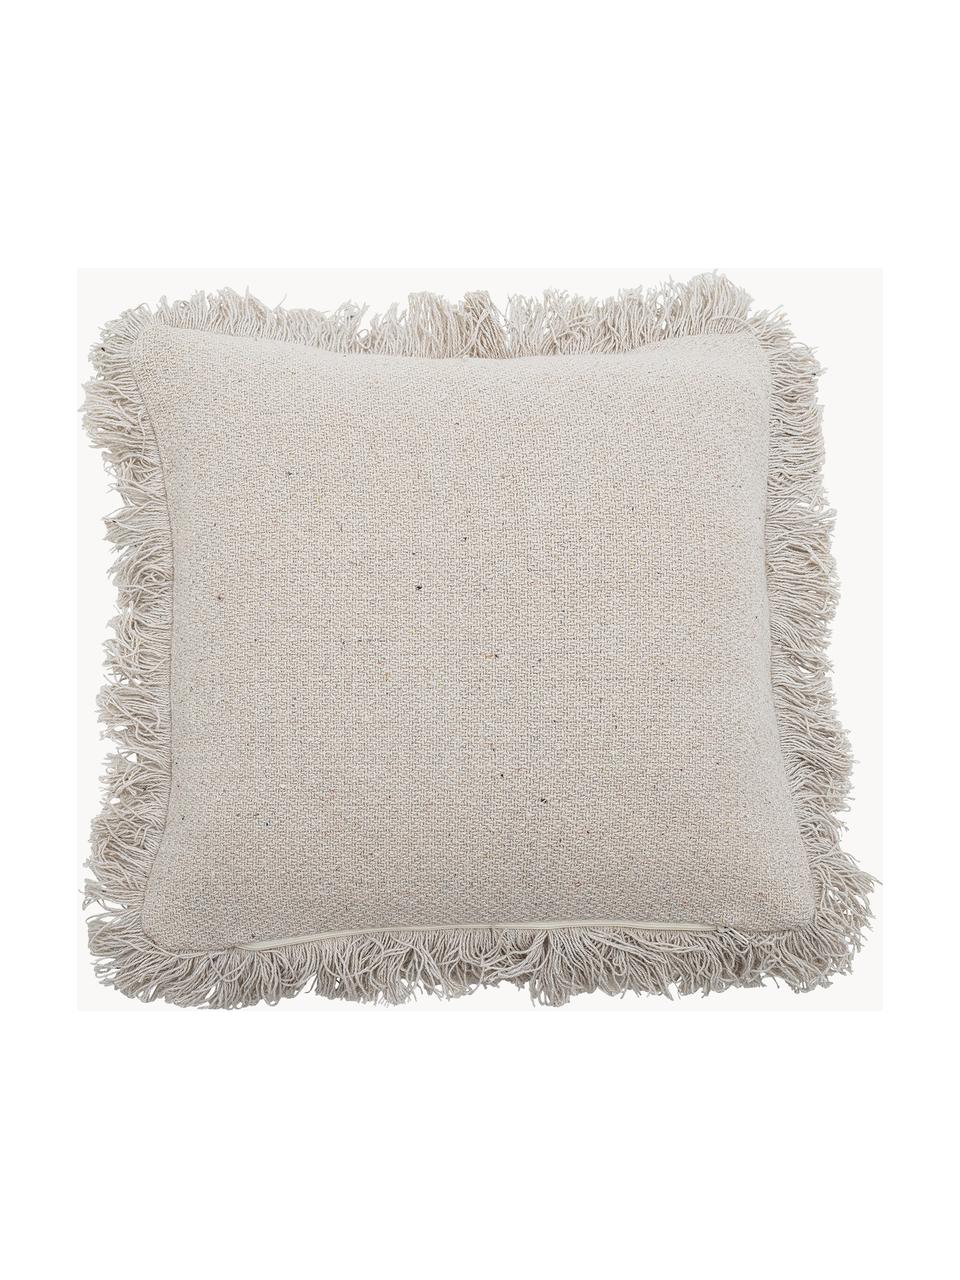 Coussin Lupo, Beige clair, ocre, larg. 40 x long. 40 cm